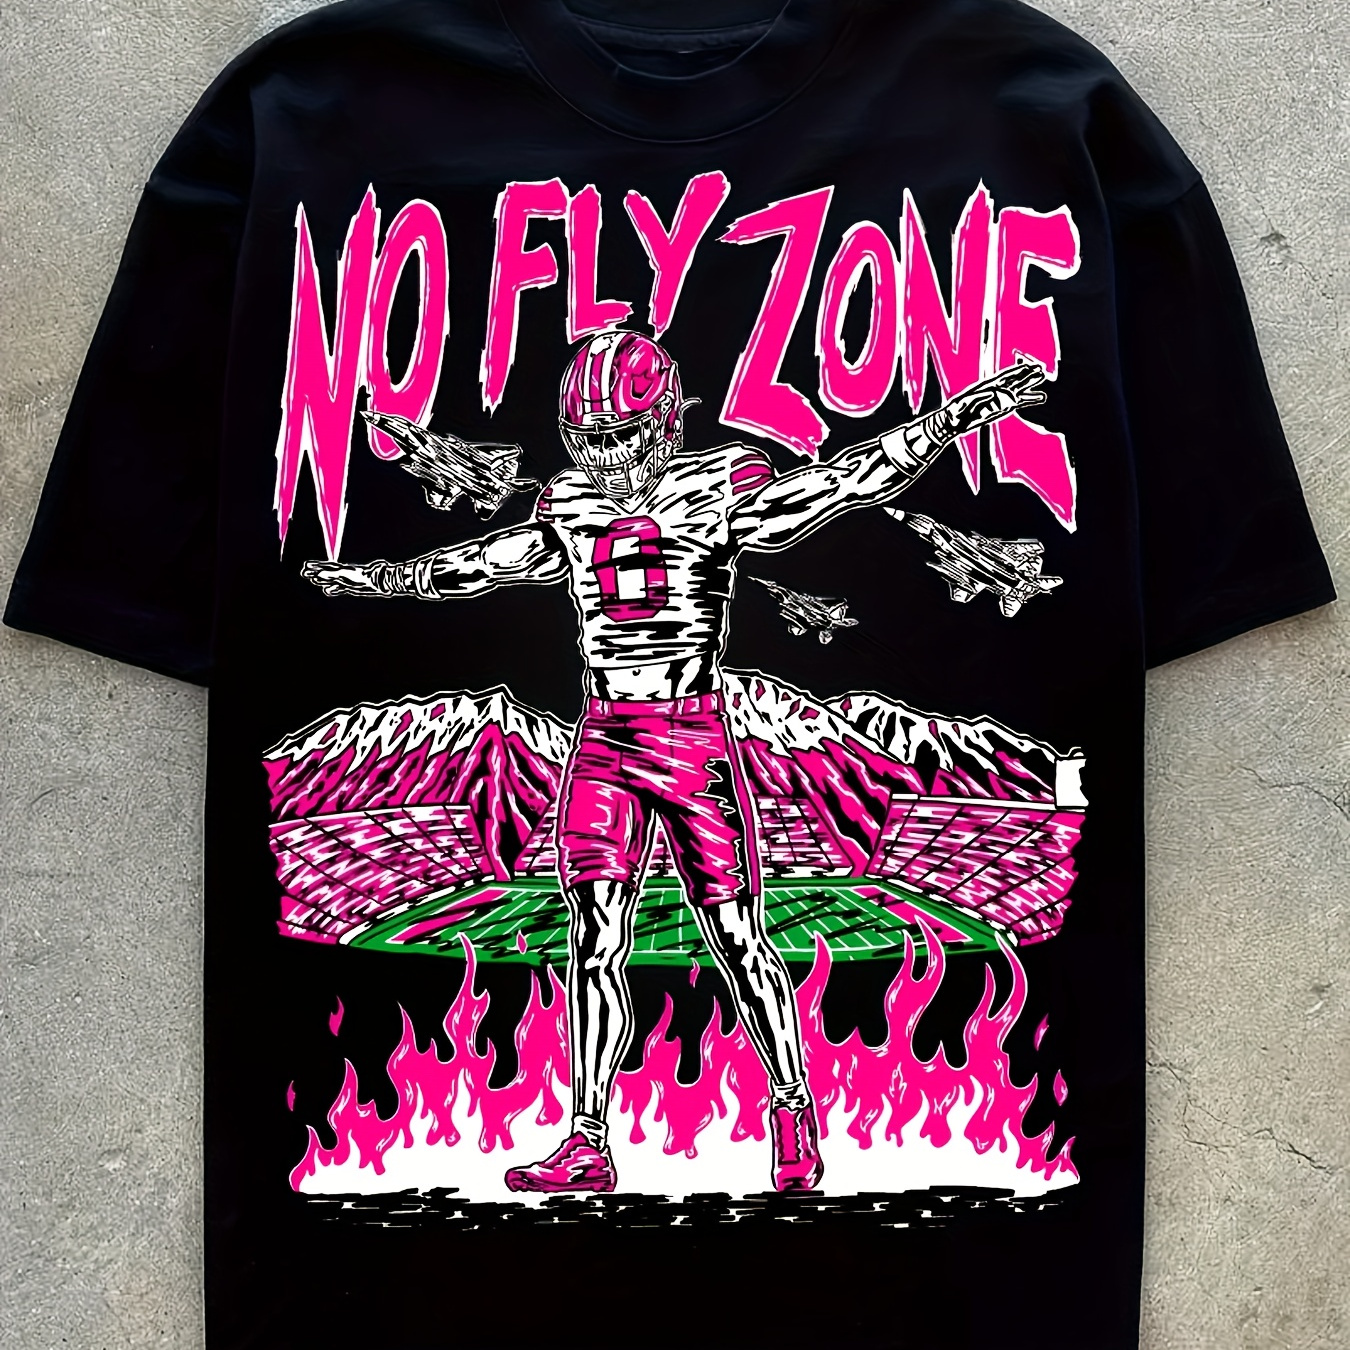 

No Fly Zone Graphic Print Men's Creative Top, Casual Short Sleeve Crew Neck T-shirt, Men's Clothing For Summer Outdoor